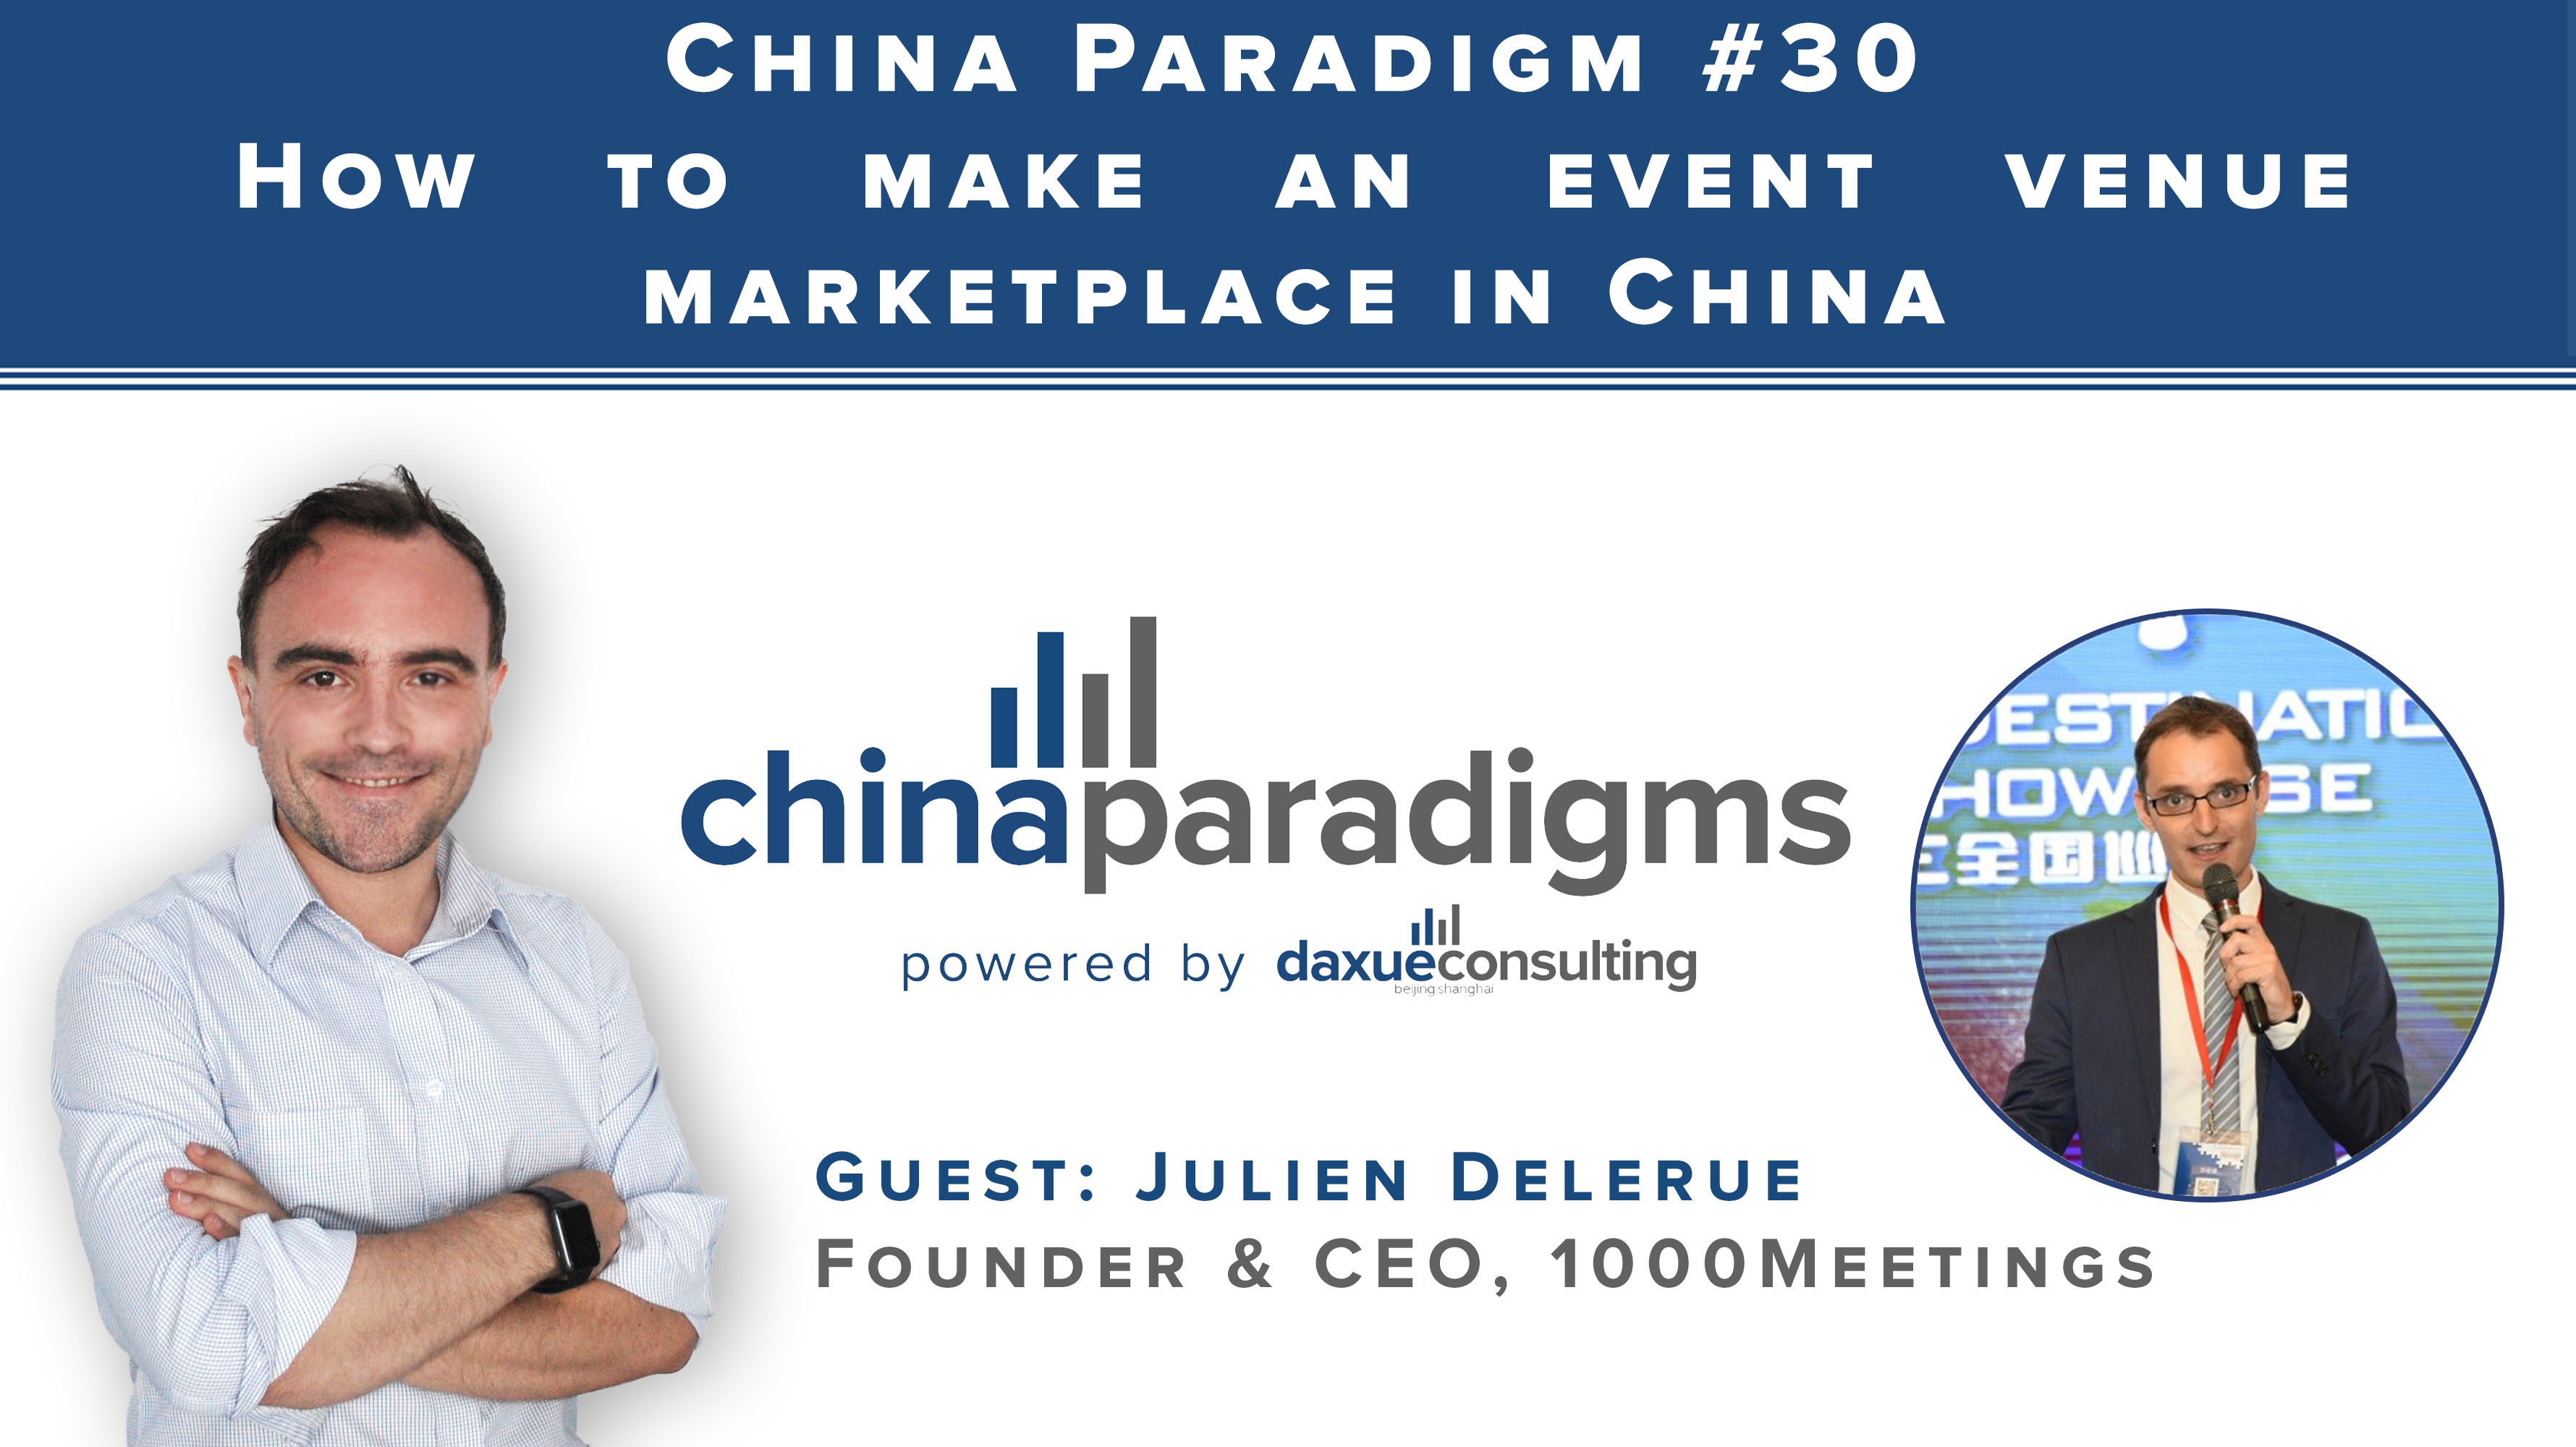 [Podcast] China Paradigm #30: How to make an event venue marketplace in China